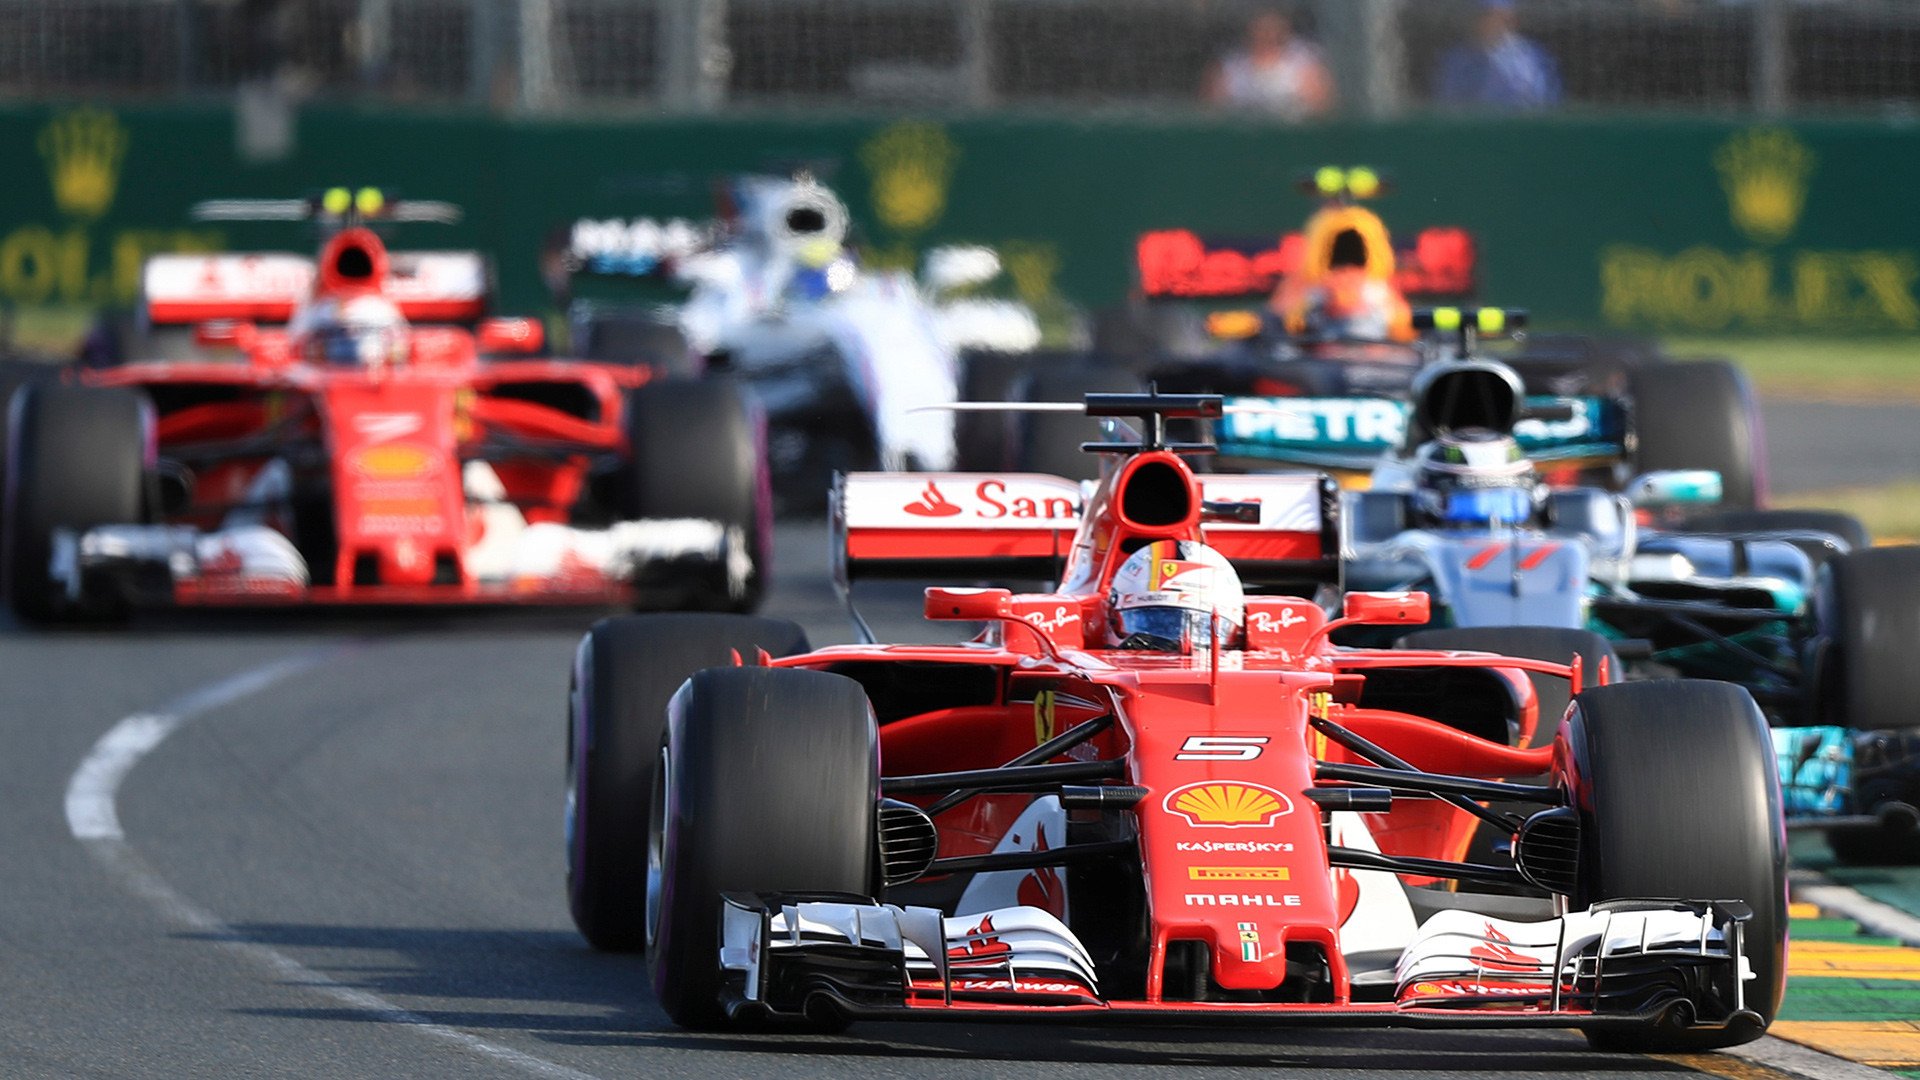 Image of a formula one race in action. 